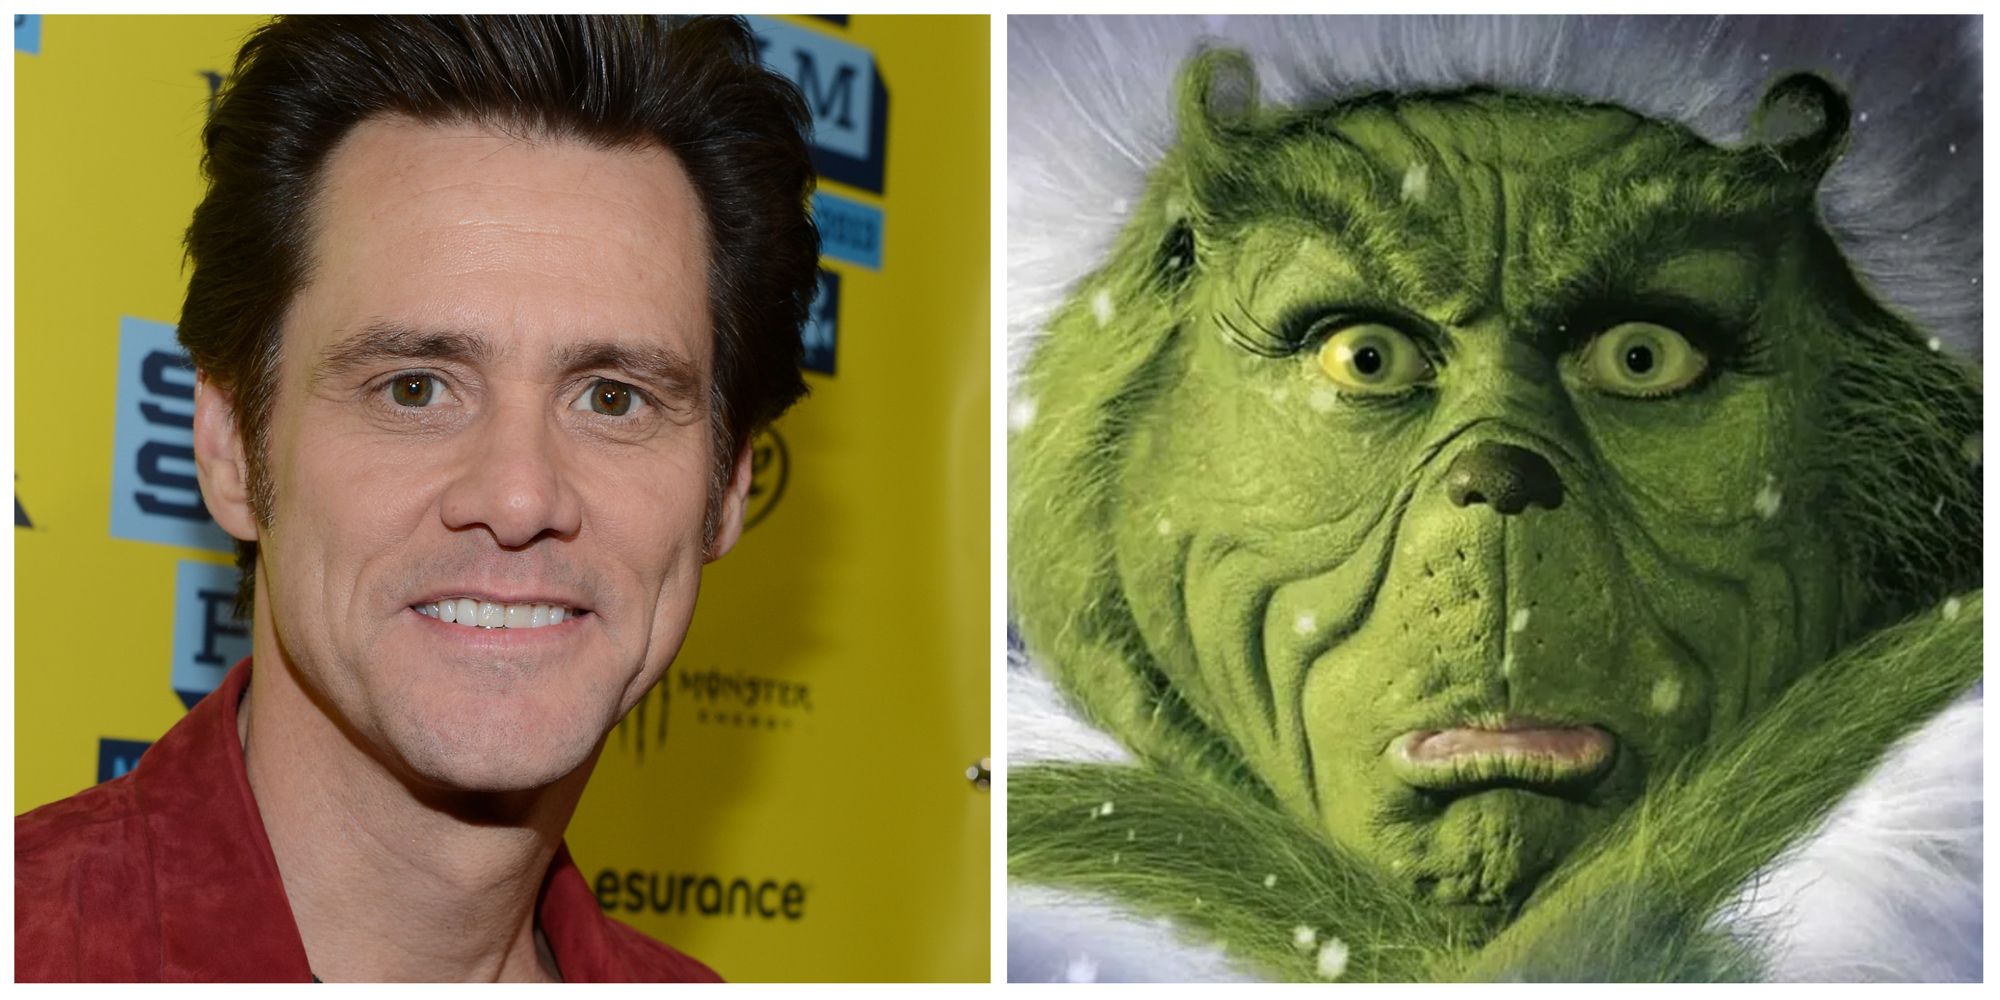 The Grinch's Face Makeup Was Torture for Jim Carrey